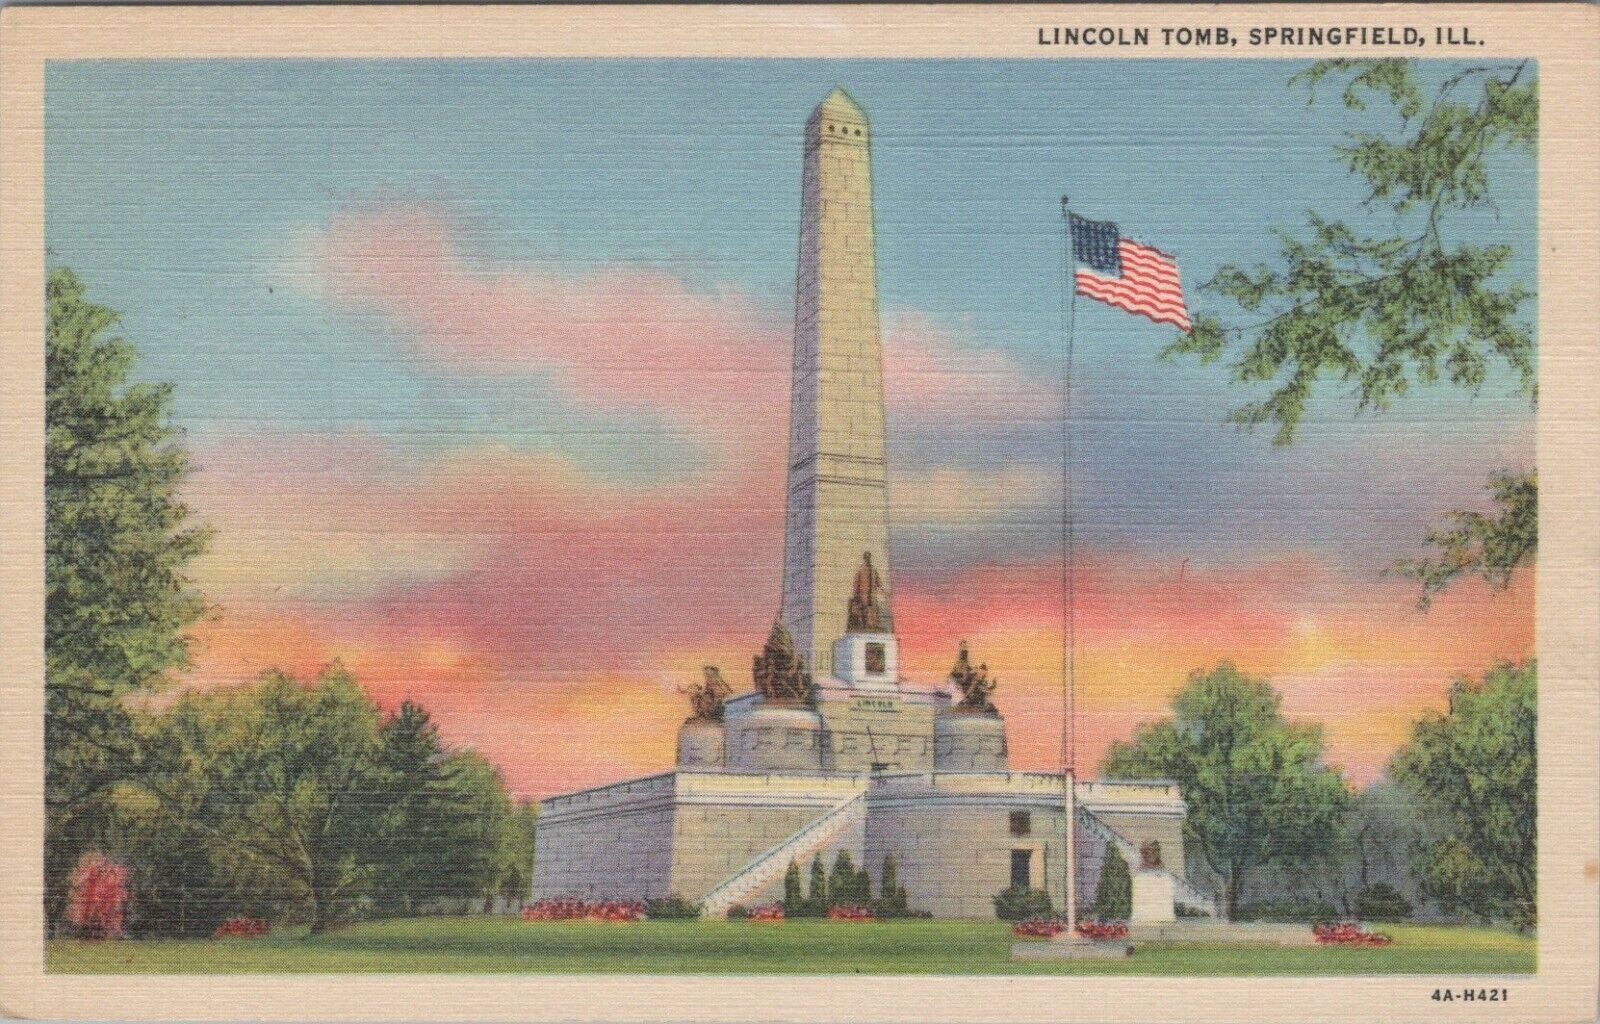 Lincoln Tomb Springfield Illinois Monument Linen Vintage Post Card